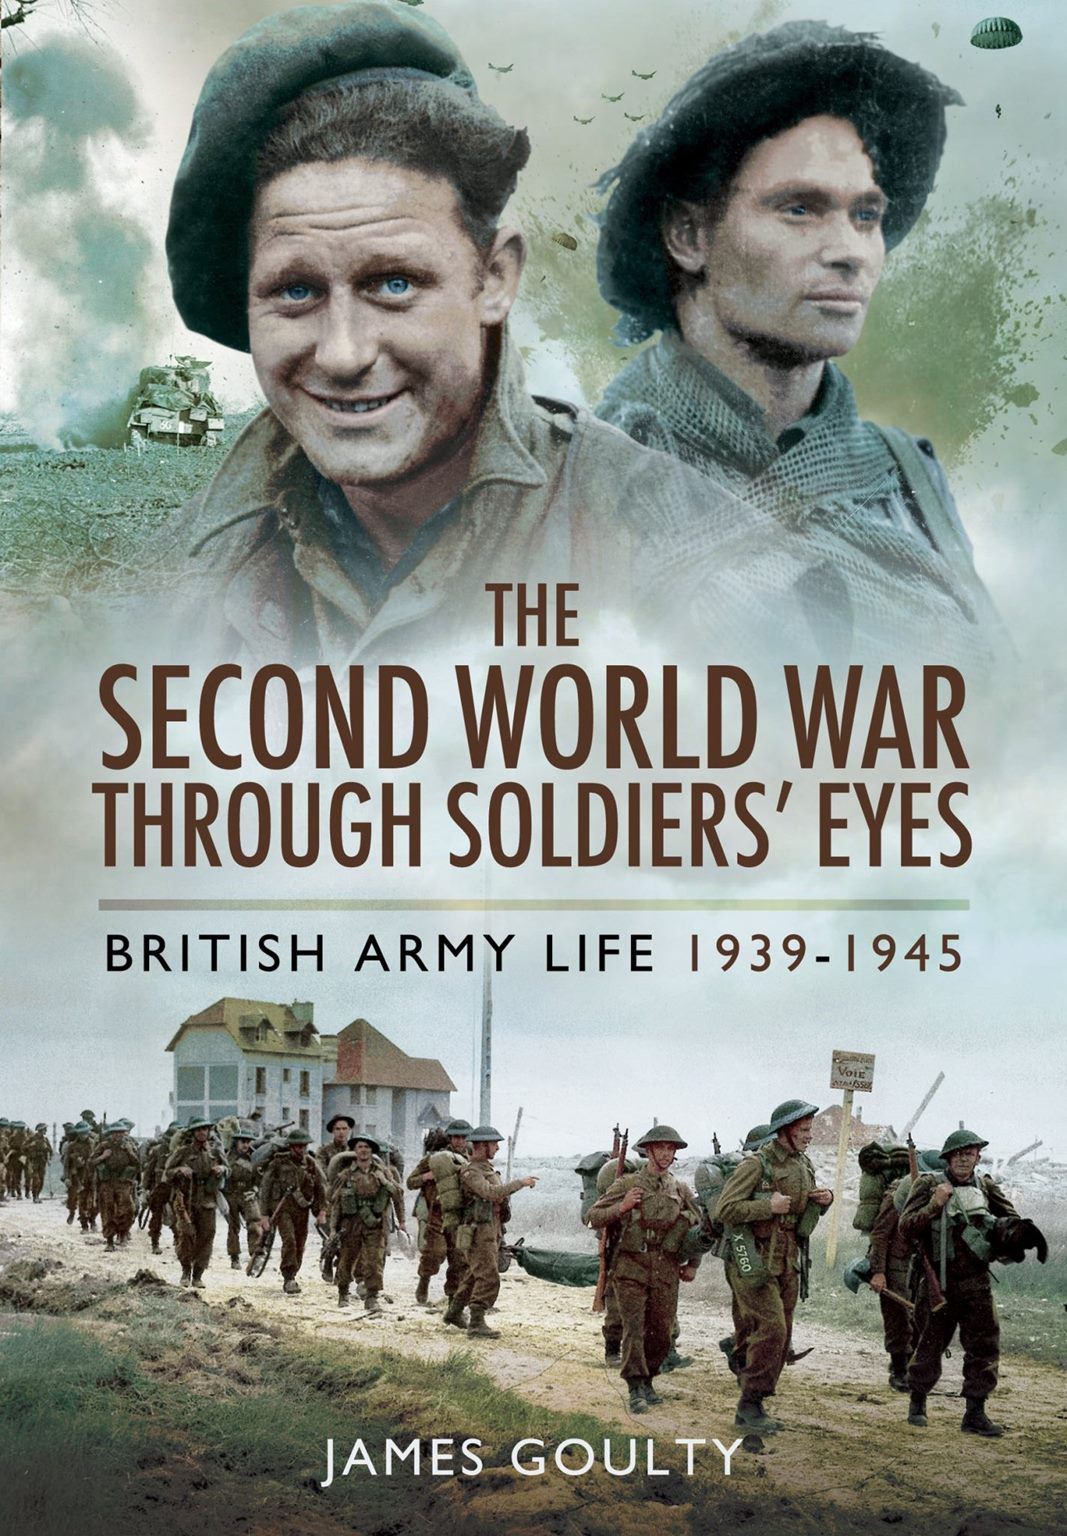 THE SECOND WORLD WAR Through Soldiers' Eyes - British Army Life 1939-1945